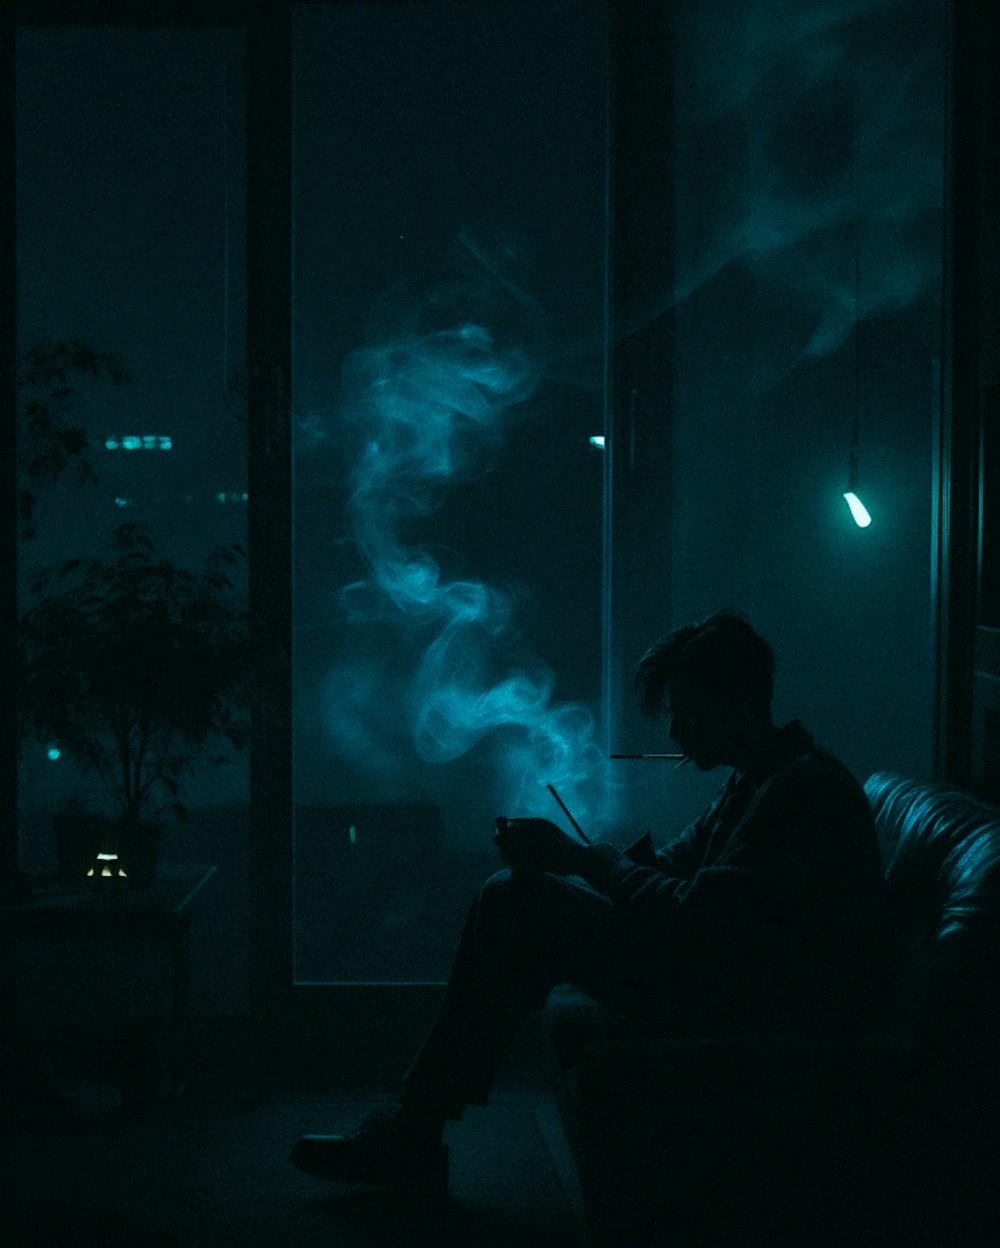 a man sitting on a couch in a dark room